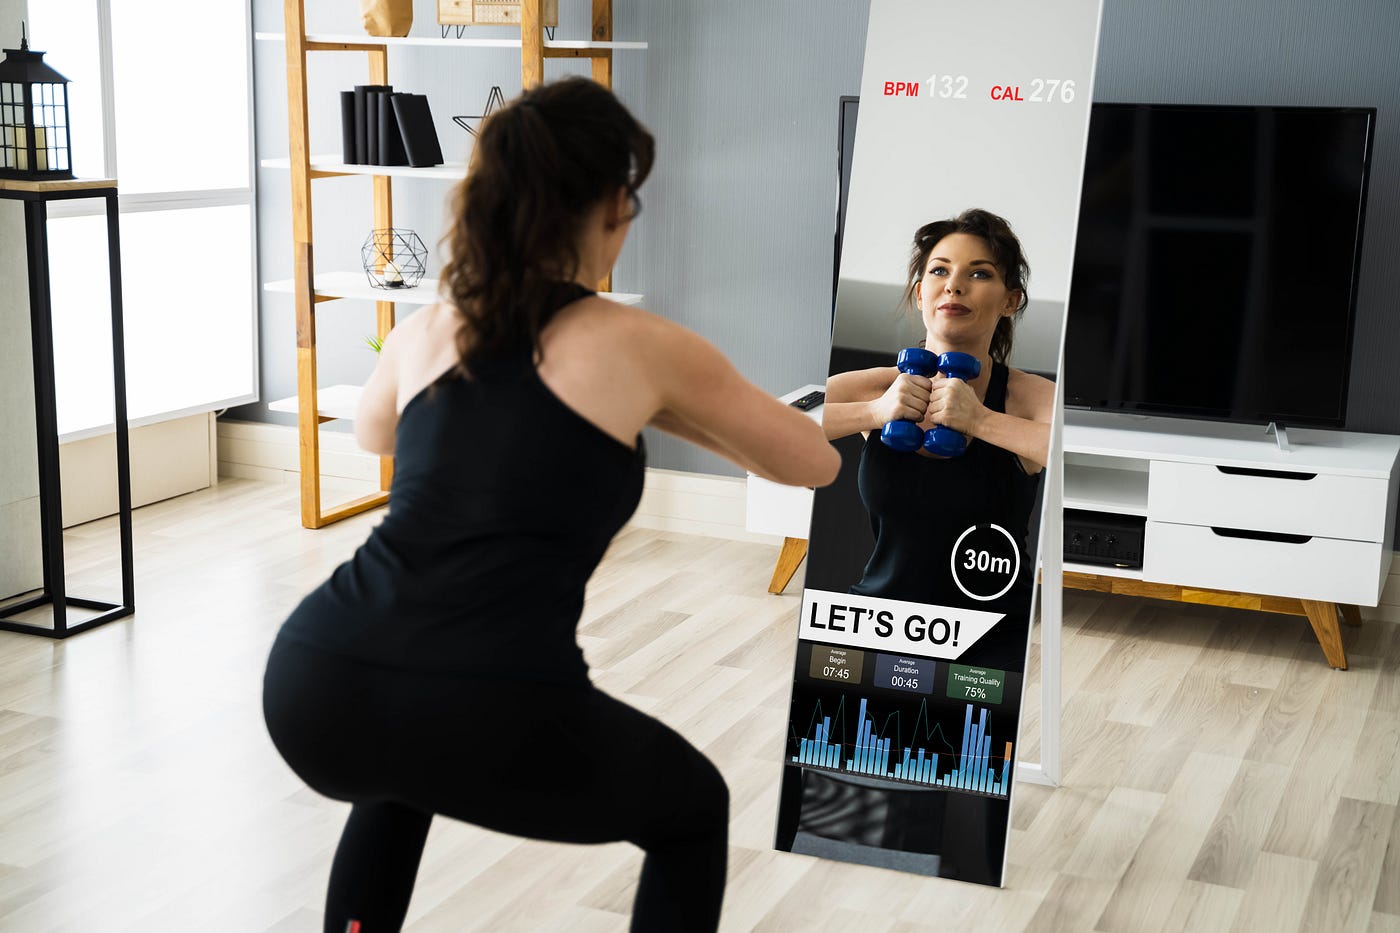 How To Make A Gym Mirror TV. The workout smart mirror that hangs